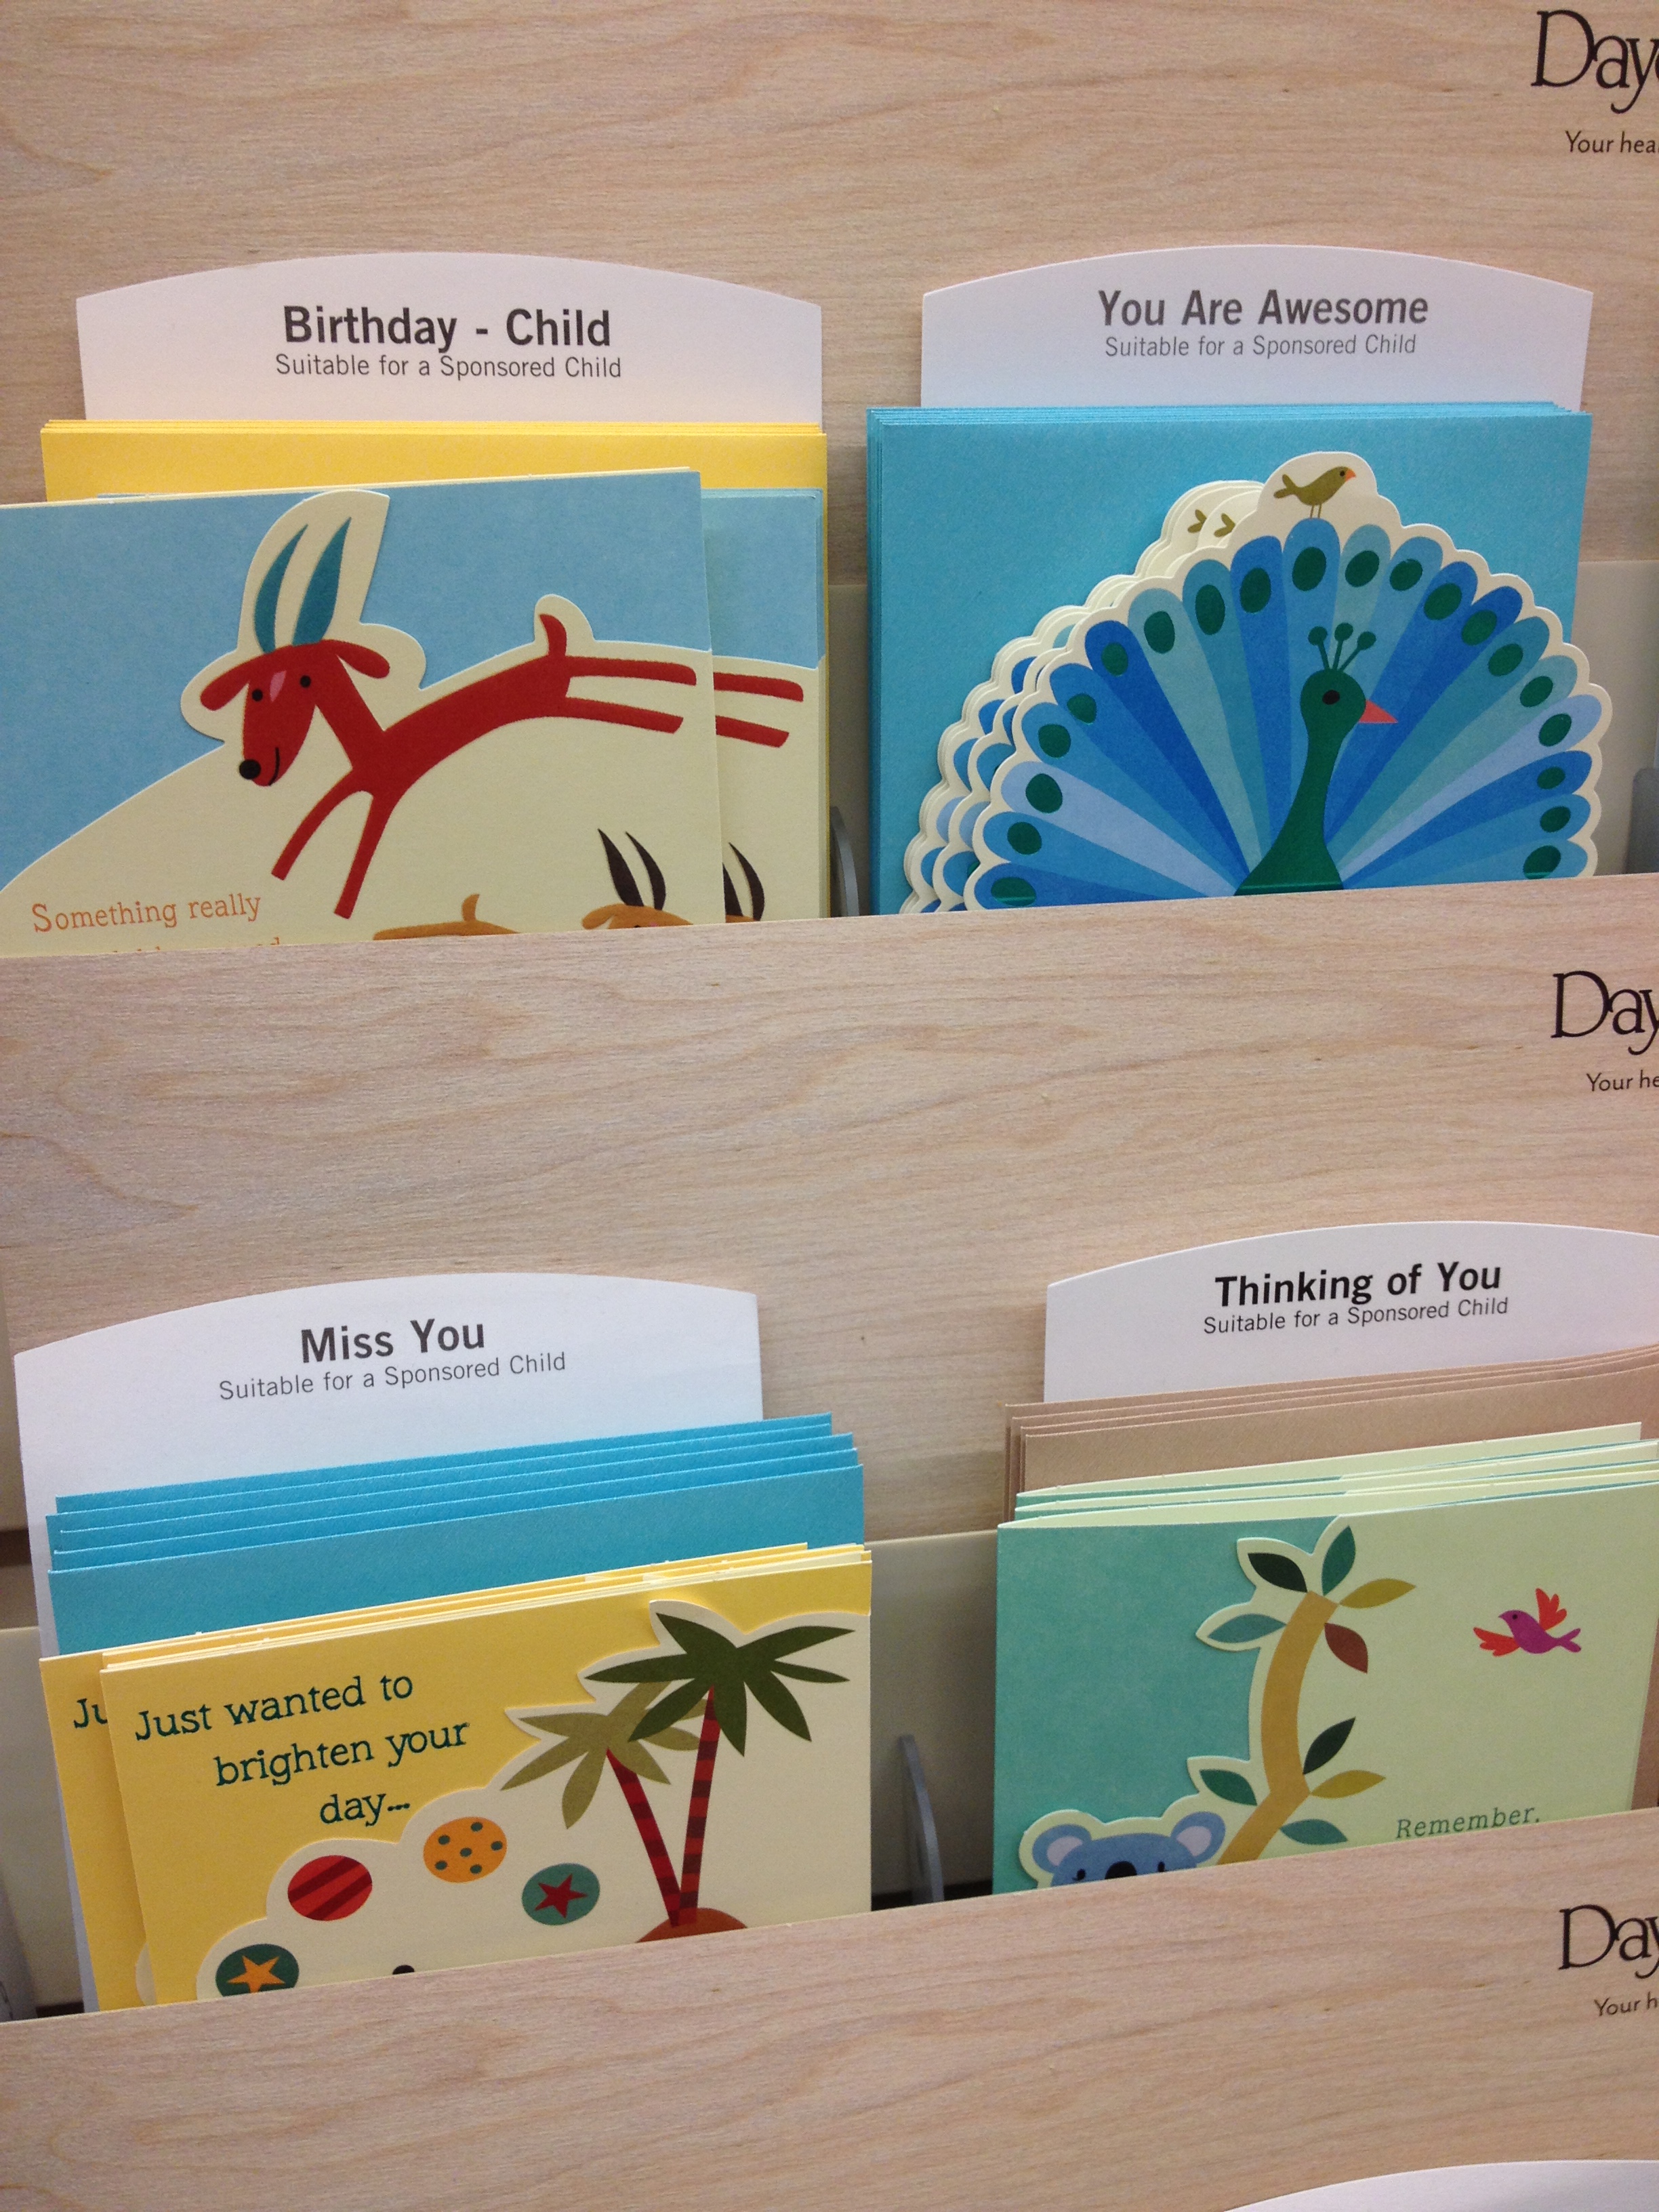 Found Colors of Compassion cards at Hobby Lobby